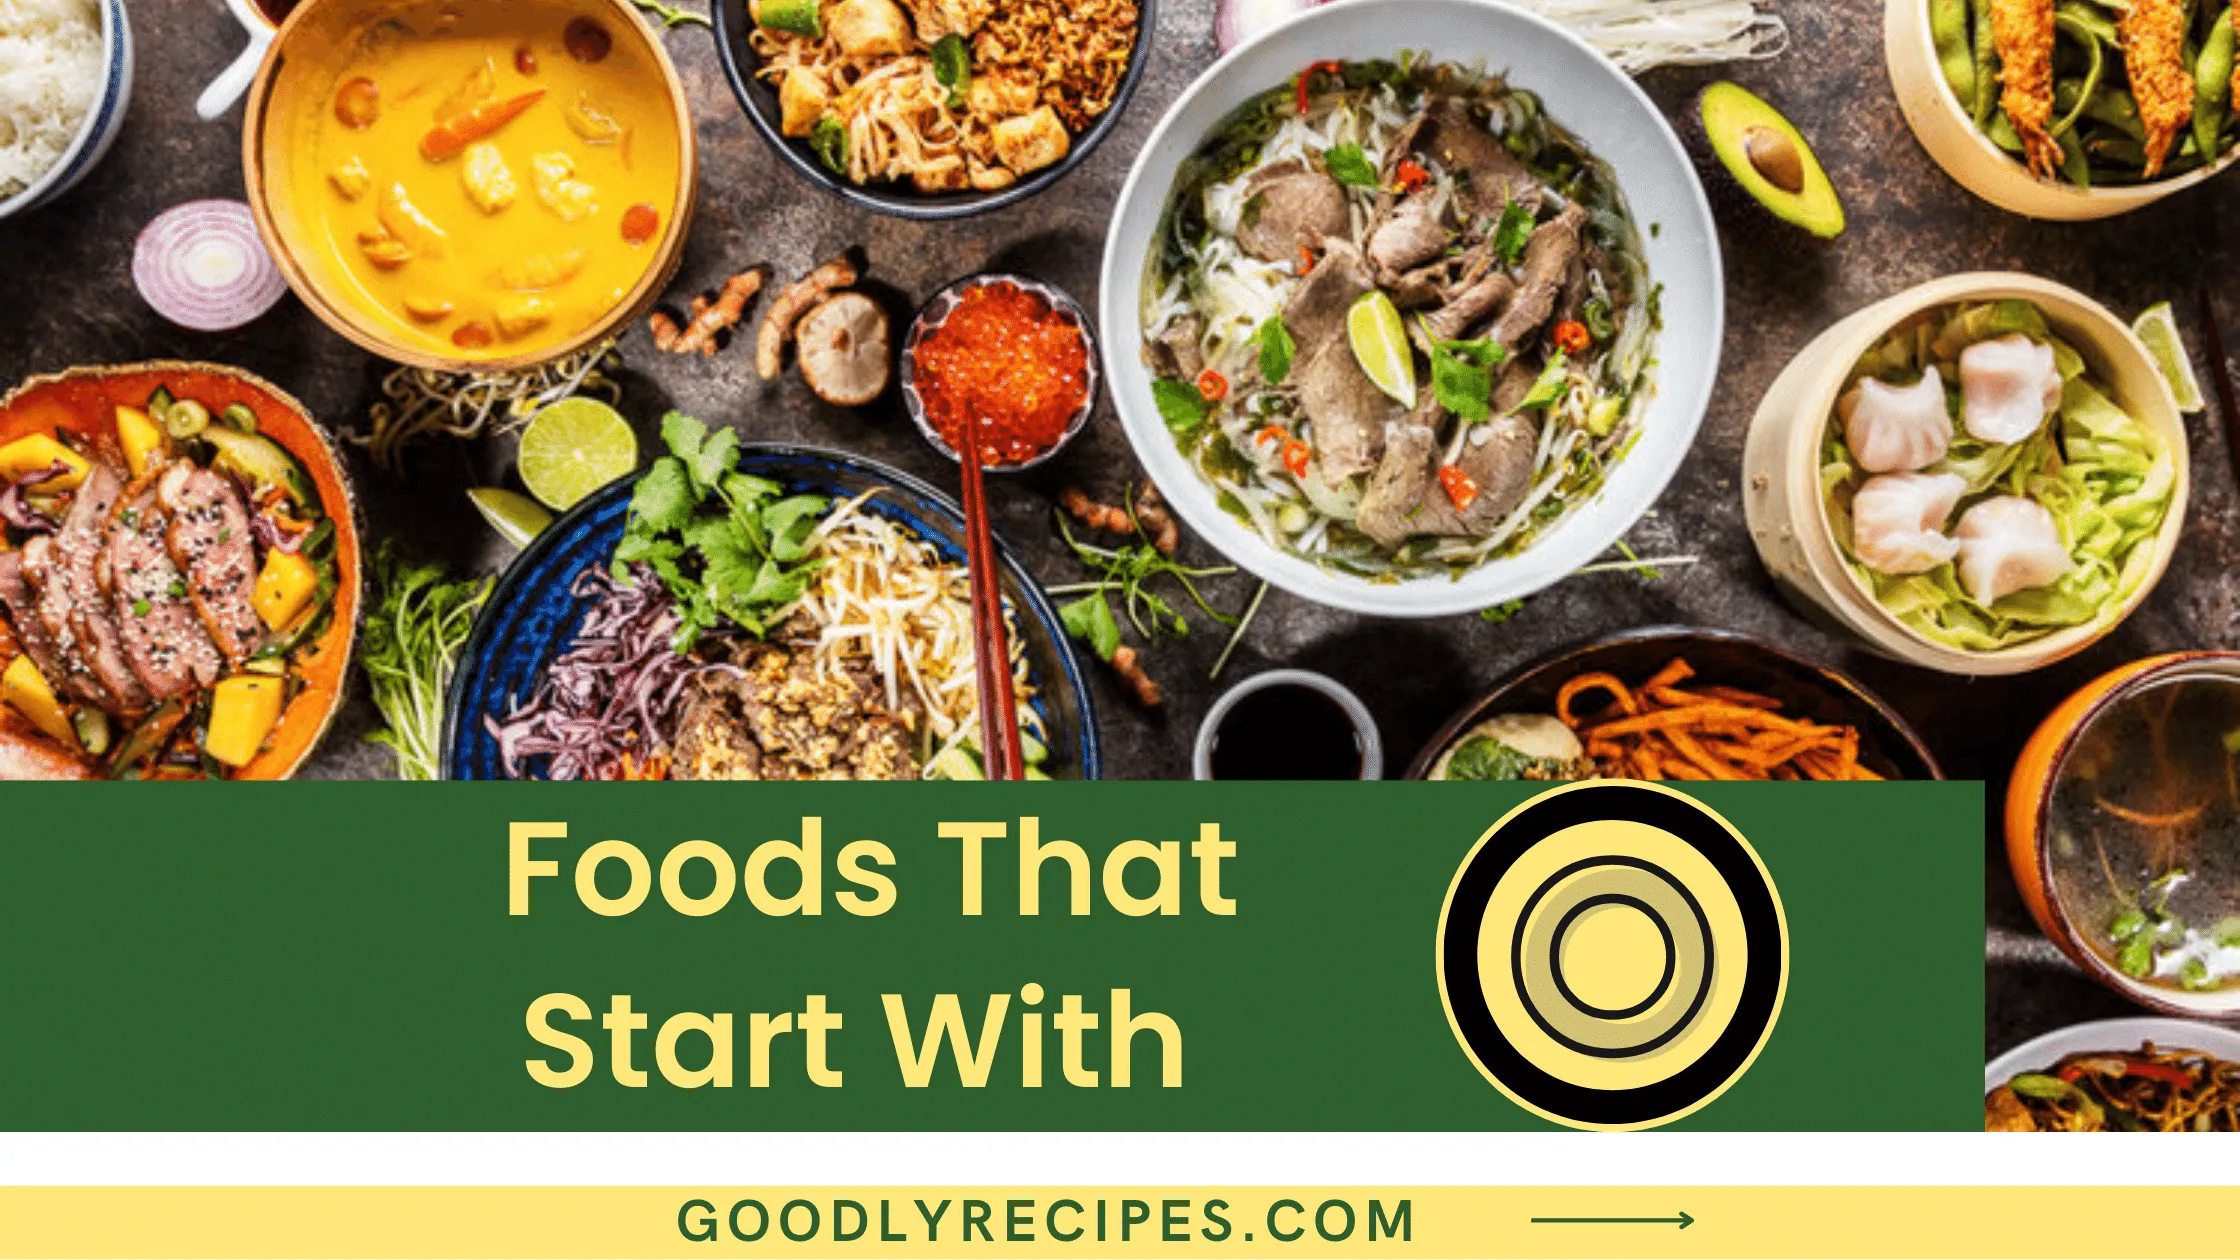 Foods That Start With O - Special Dishes